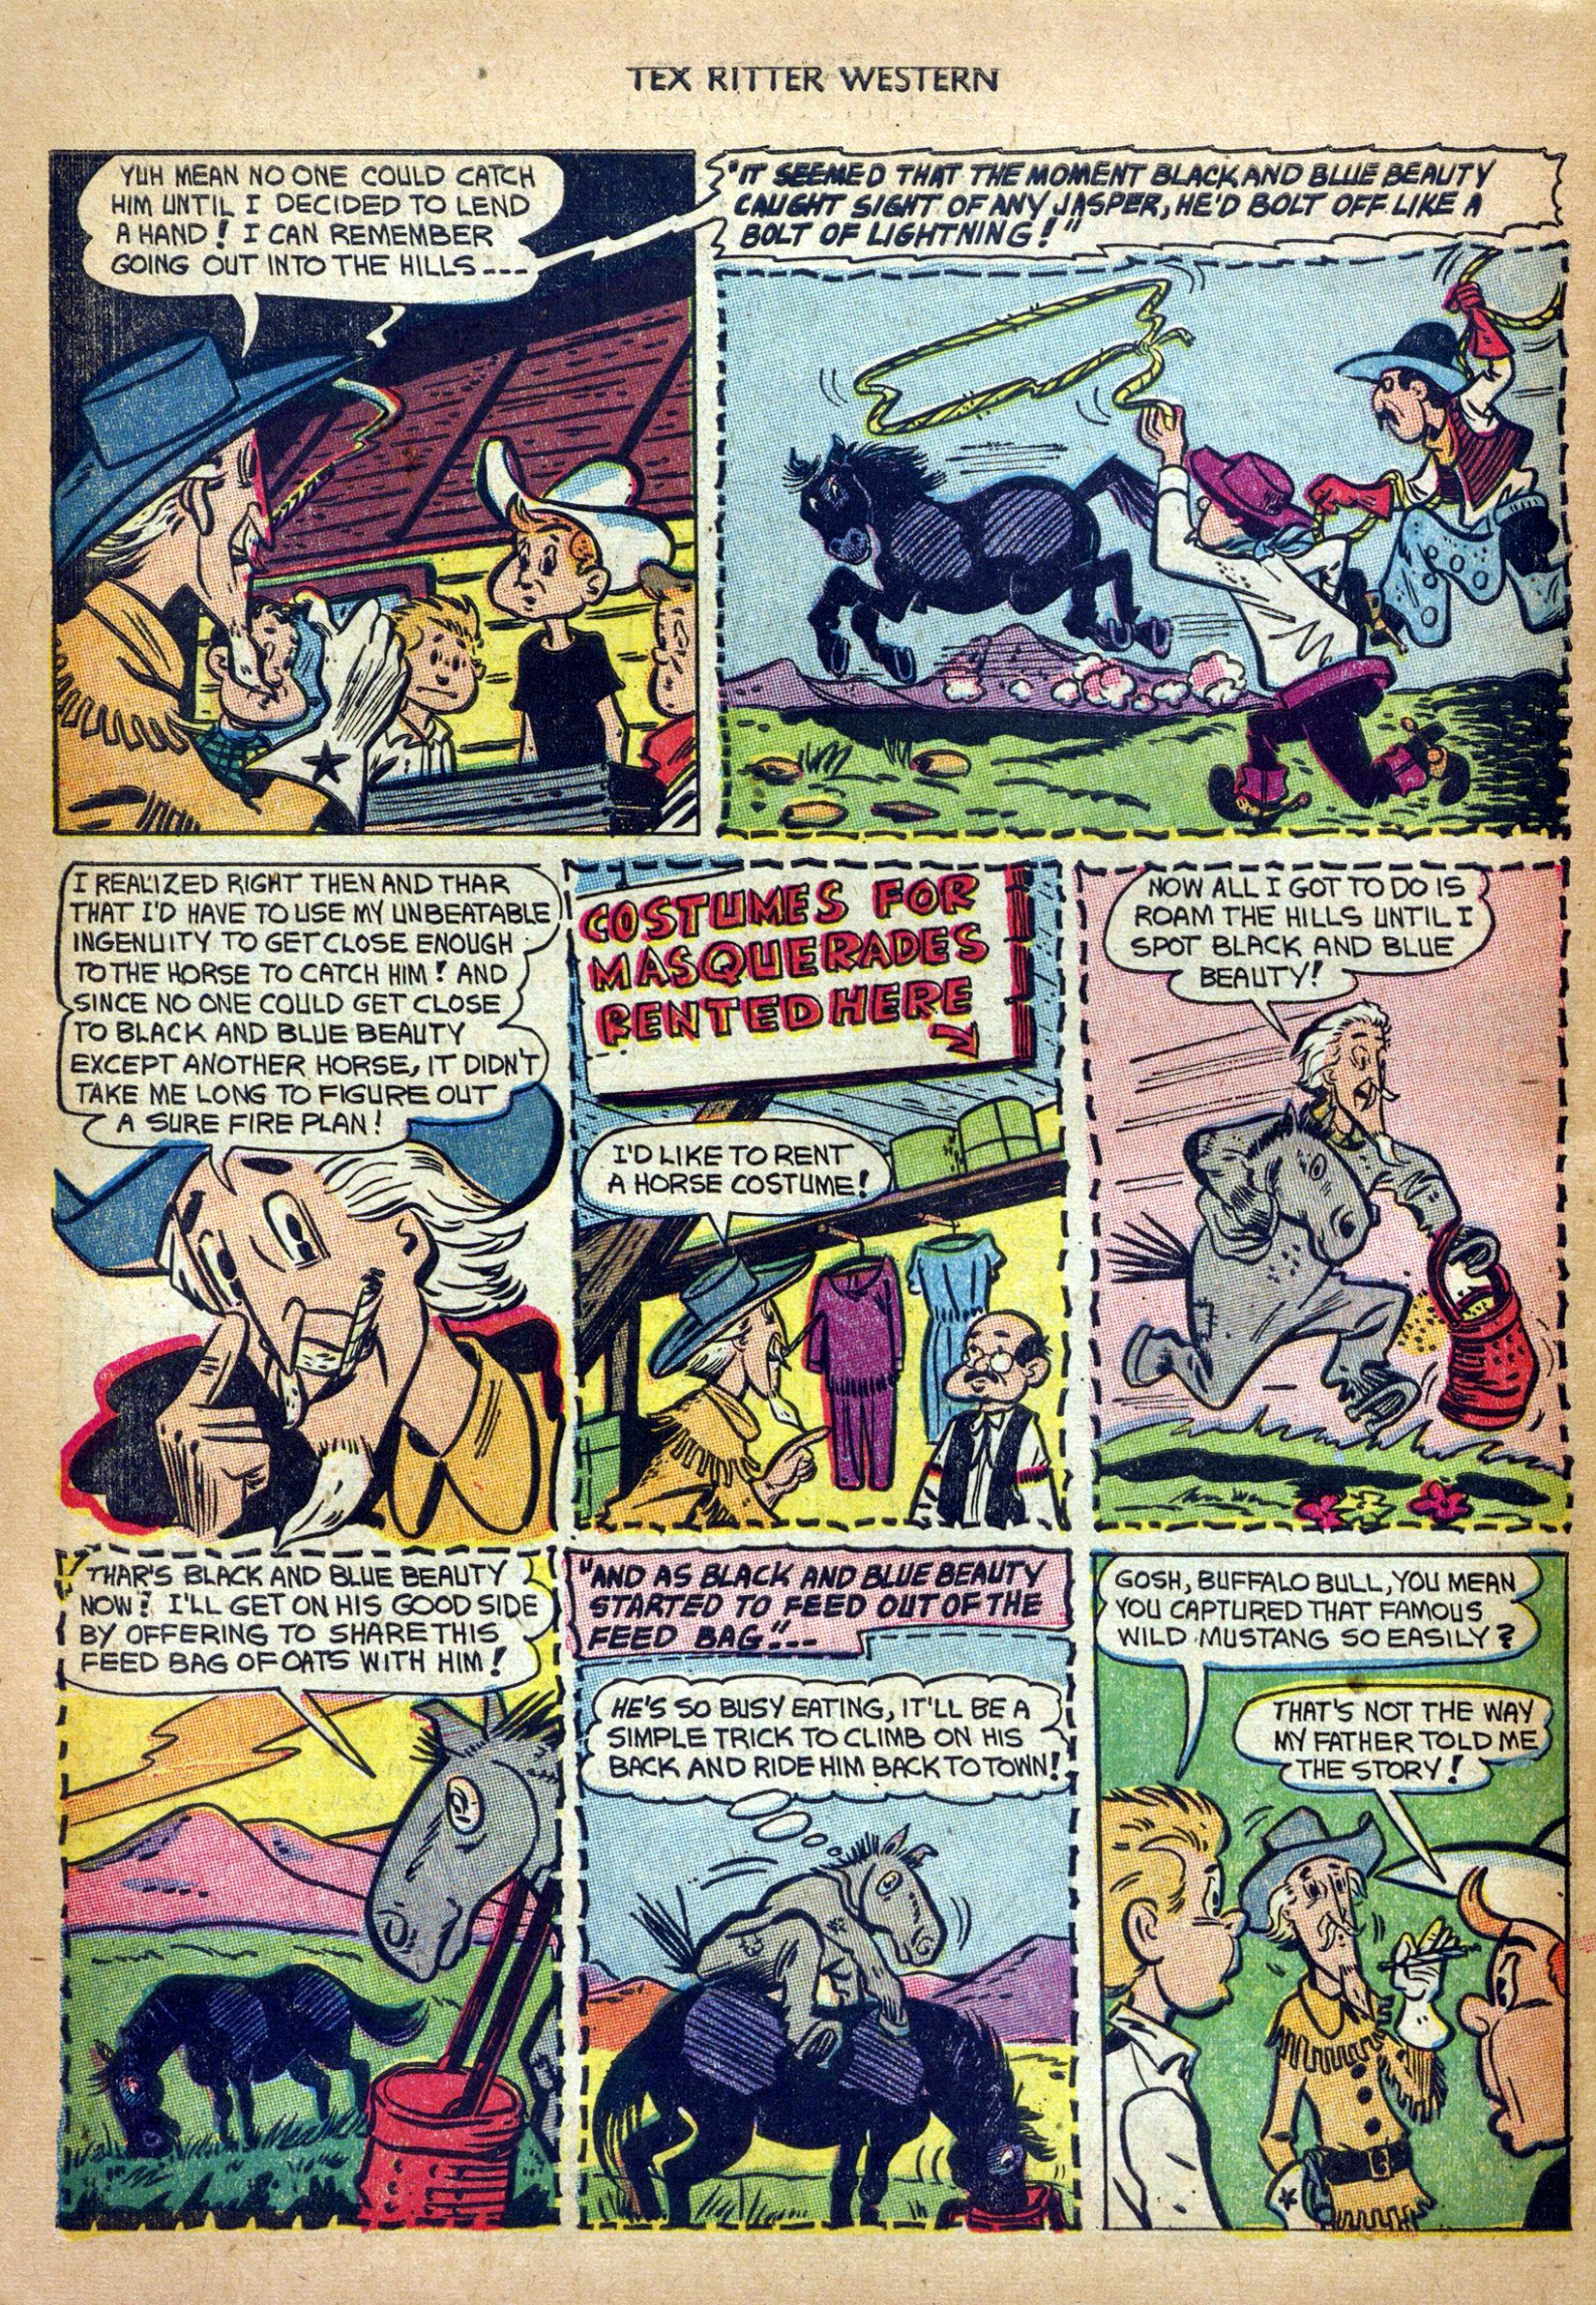 Read online Tex Ritter Western comic -  Issue #18 - 30